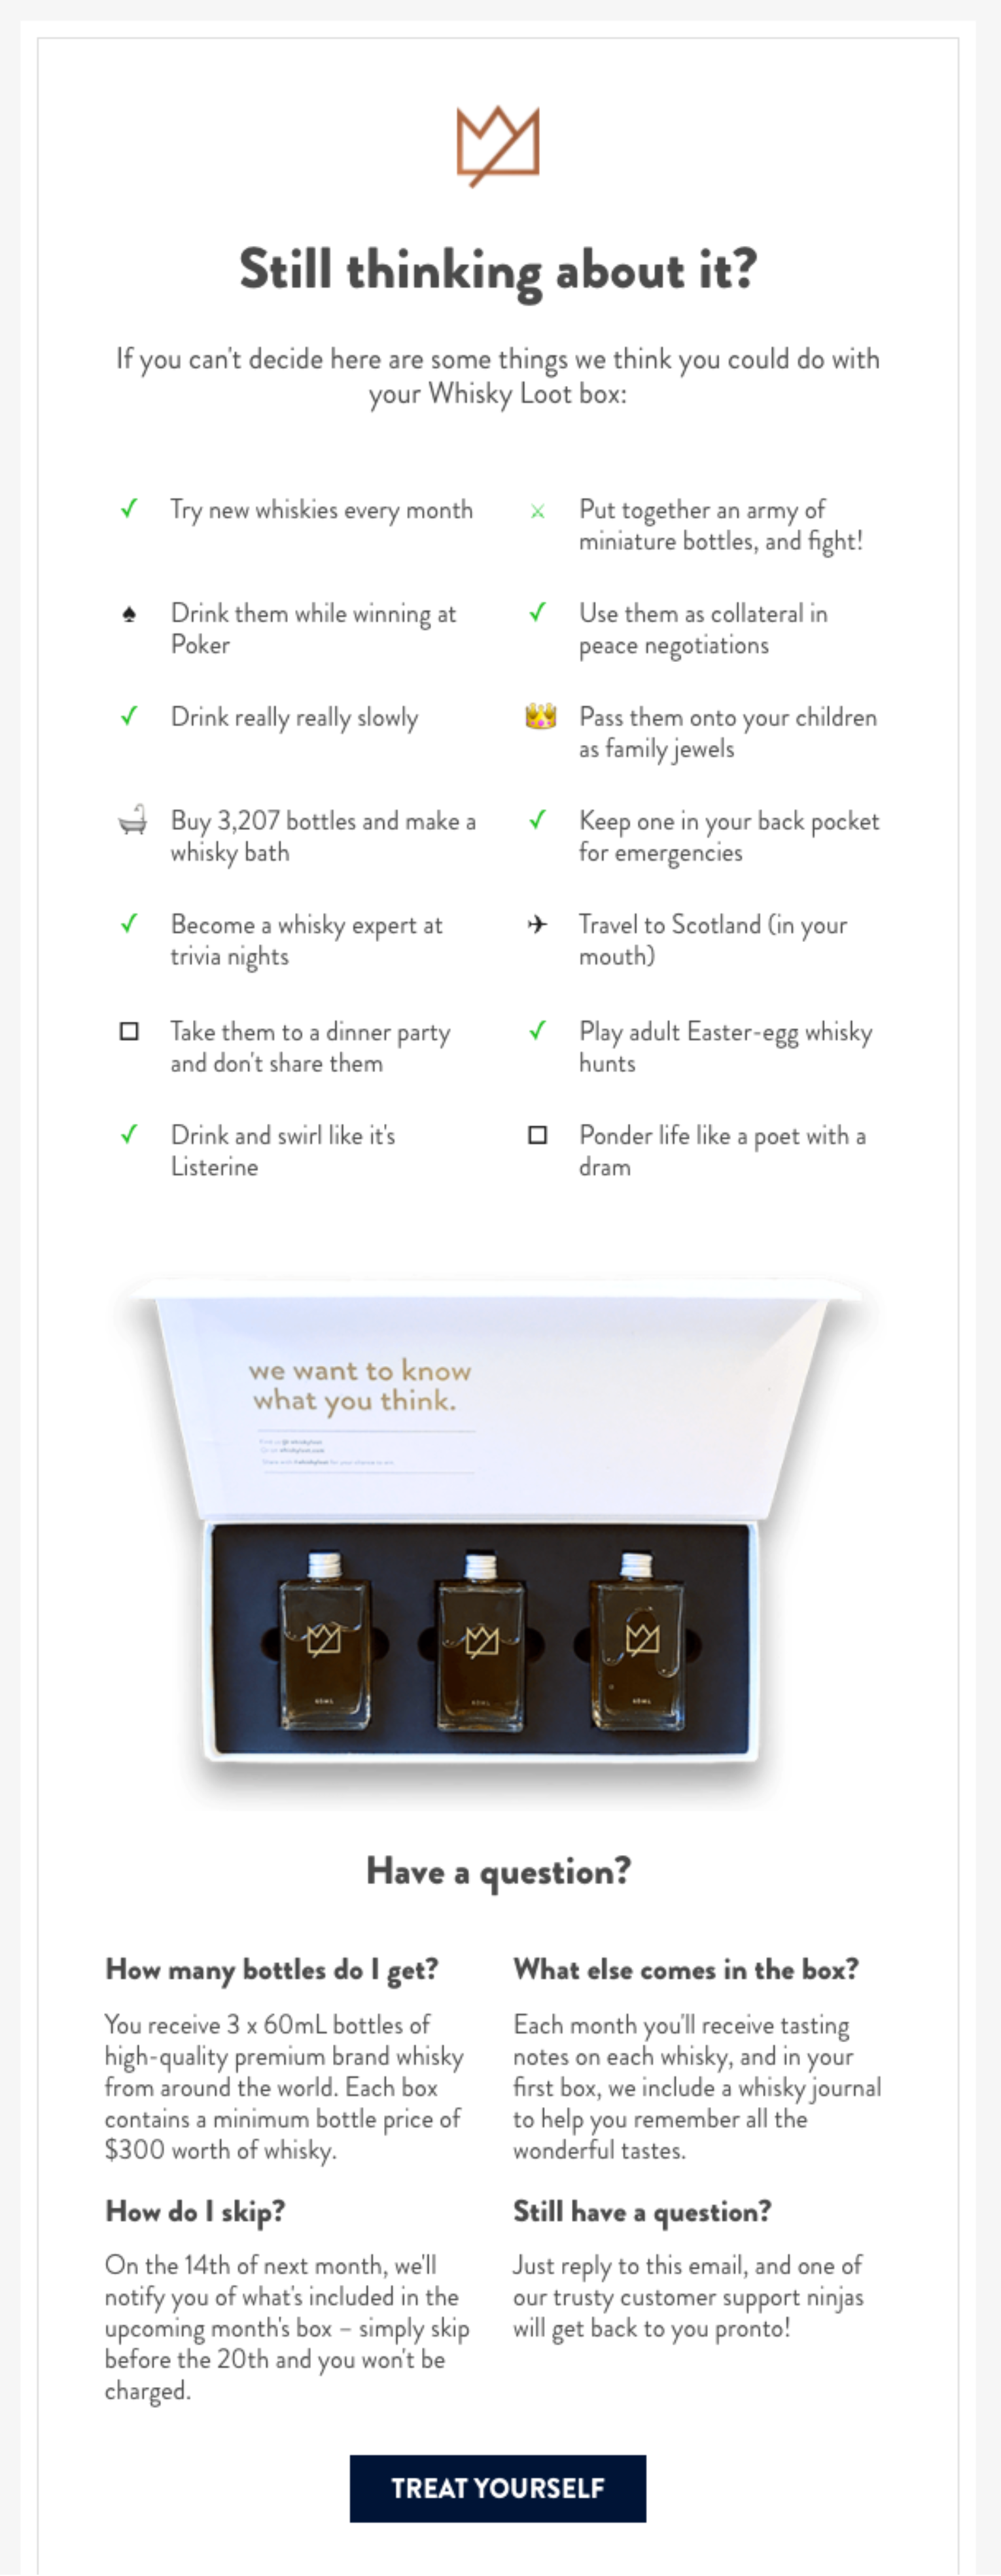 Abandoned cart email example from Whiskey Loot